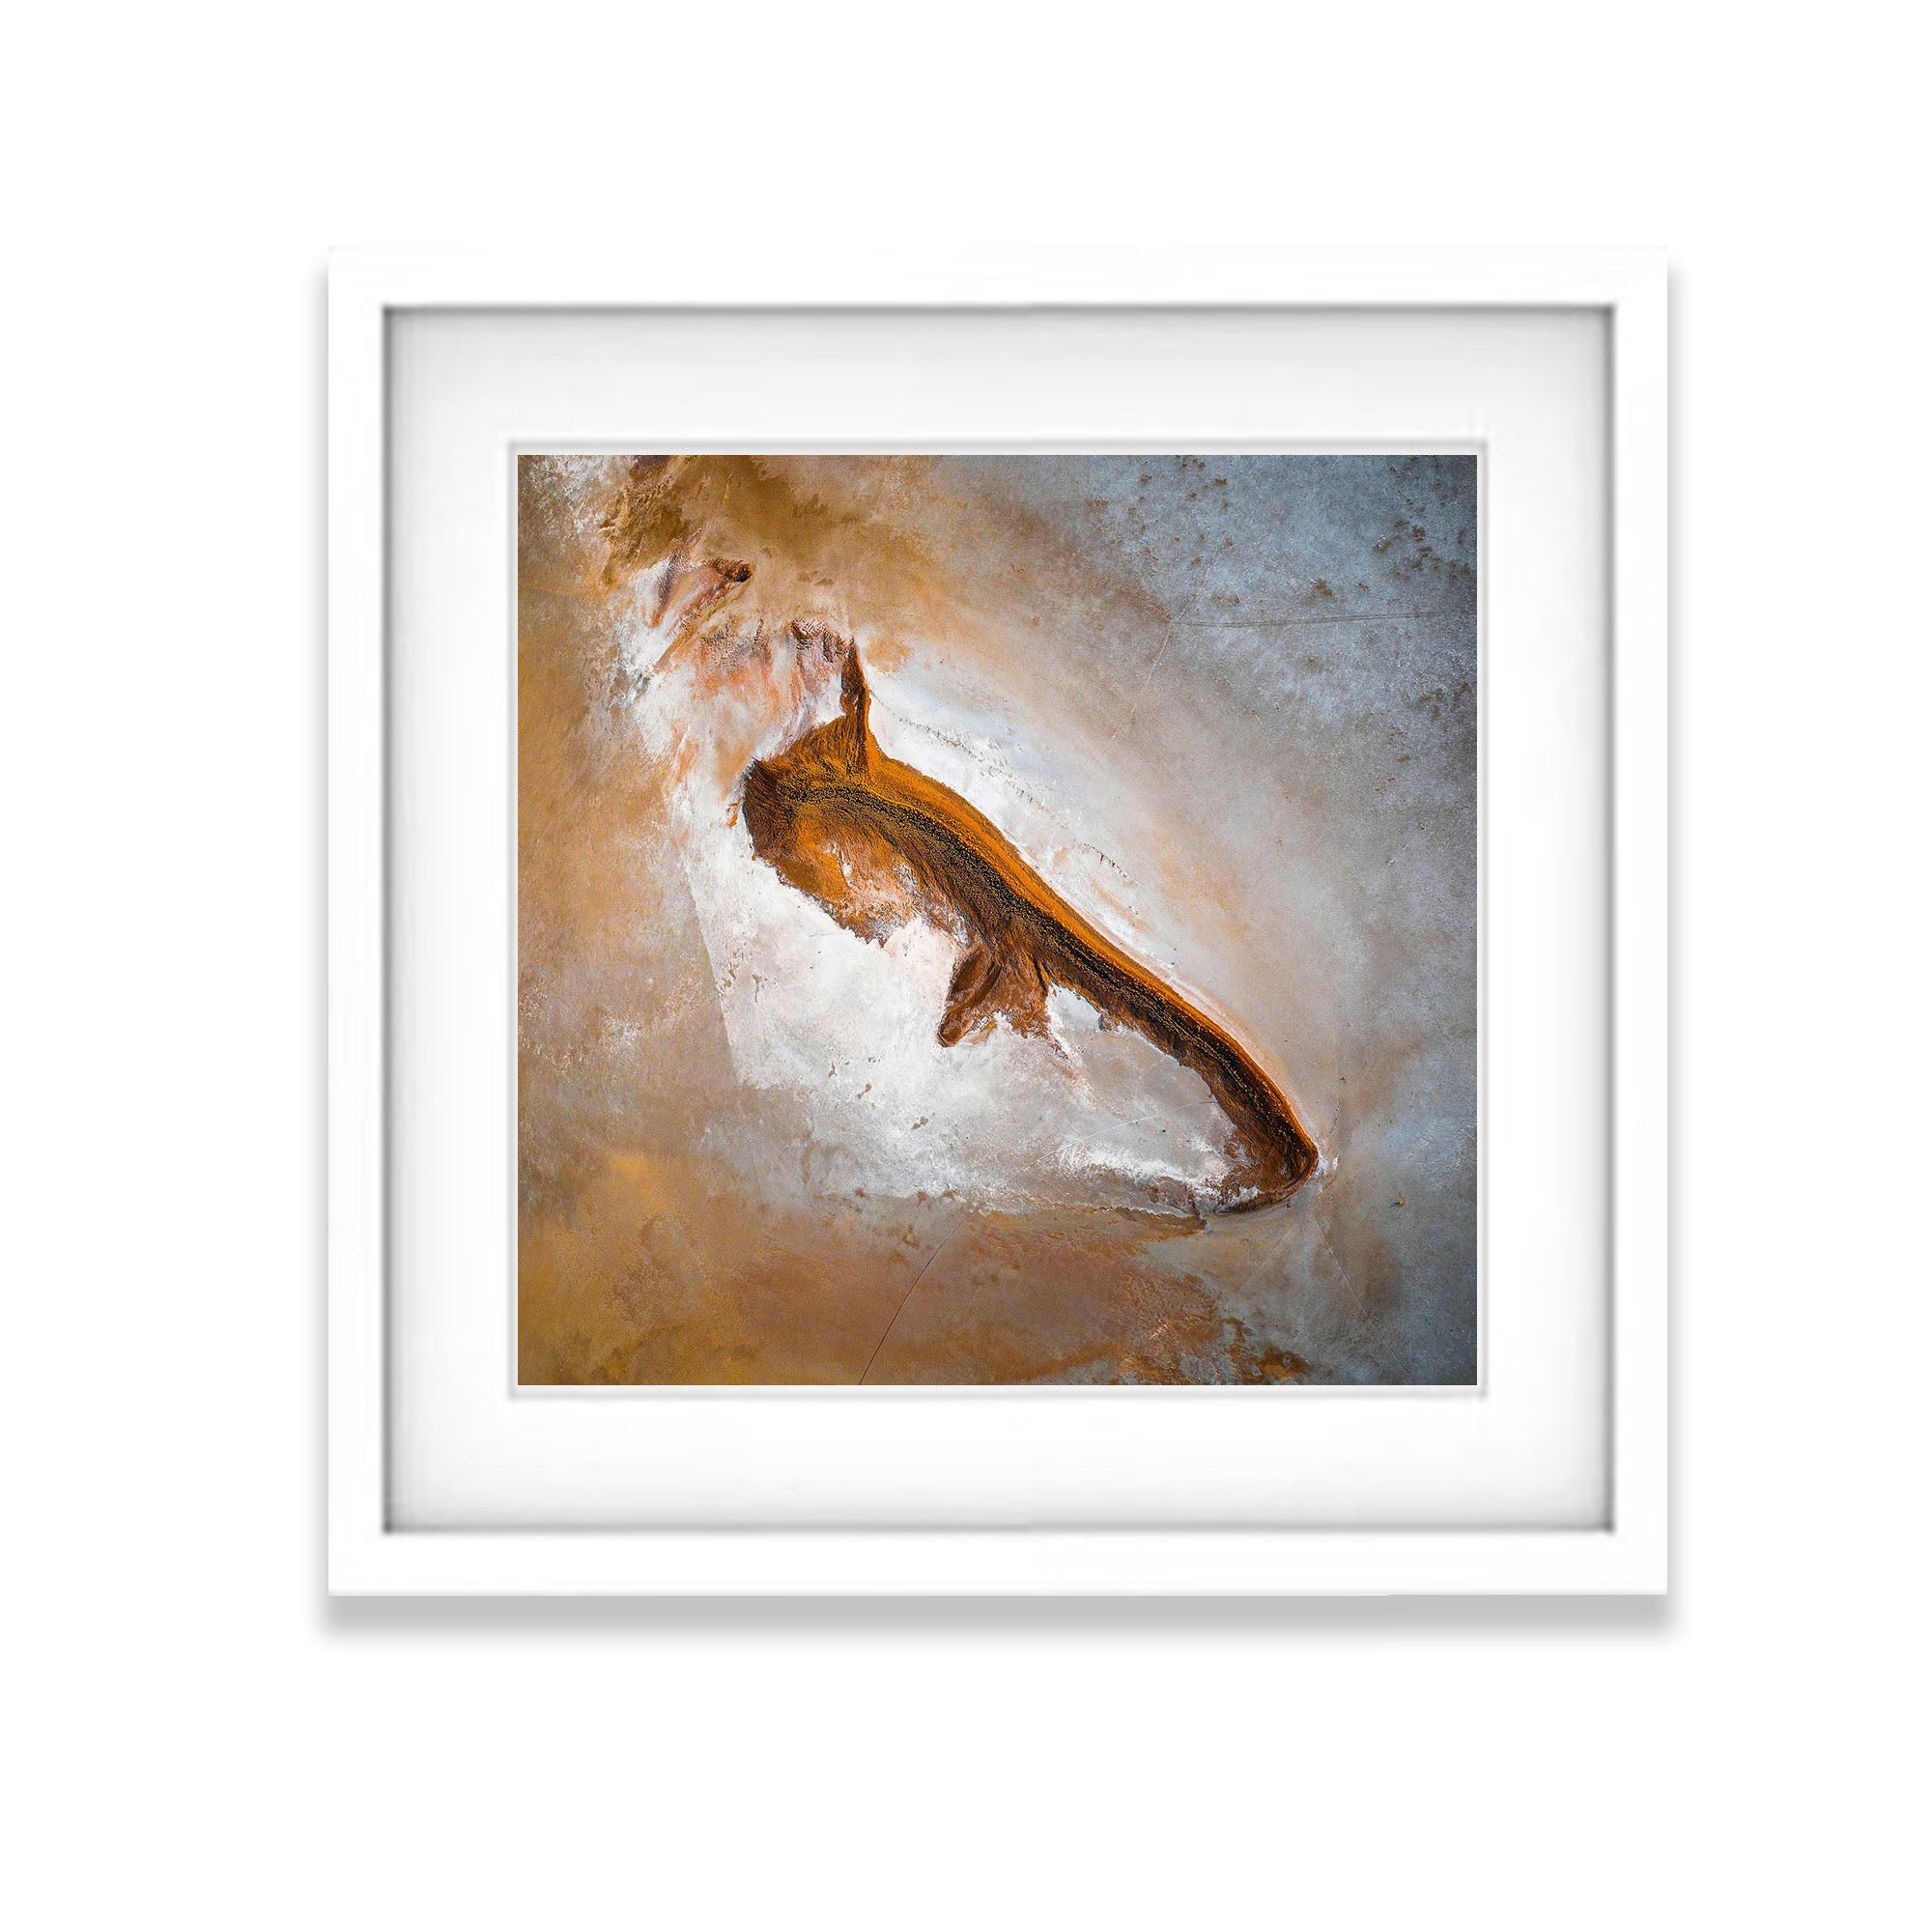 ARTWORK INSTOCK - 'Amphibian' - Available 150 x 150cms Mounted Print (ready to frame) in the gallery TODAY!